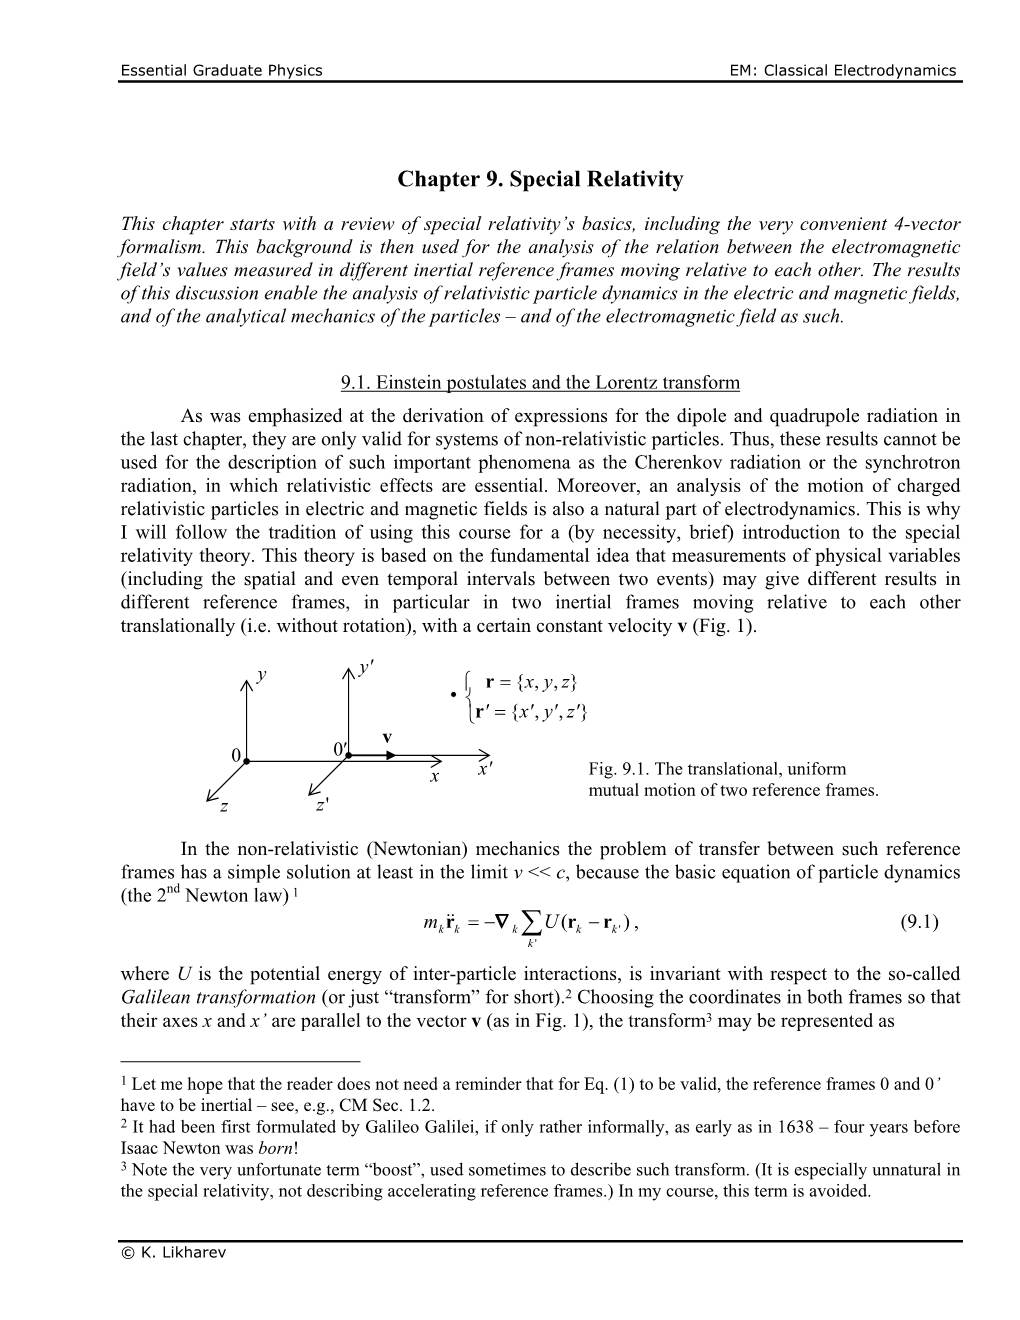 Chapter 9. Special Relativity